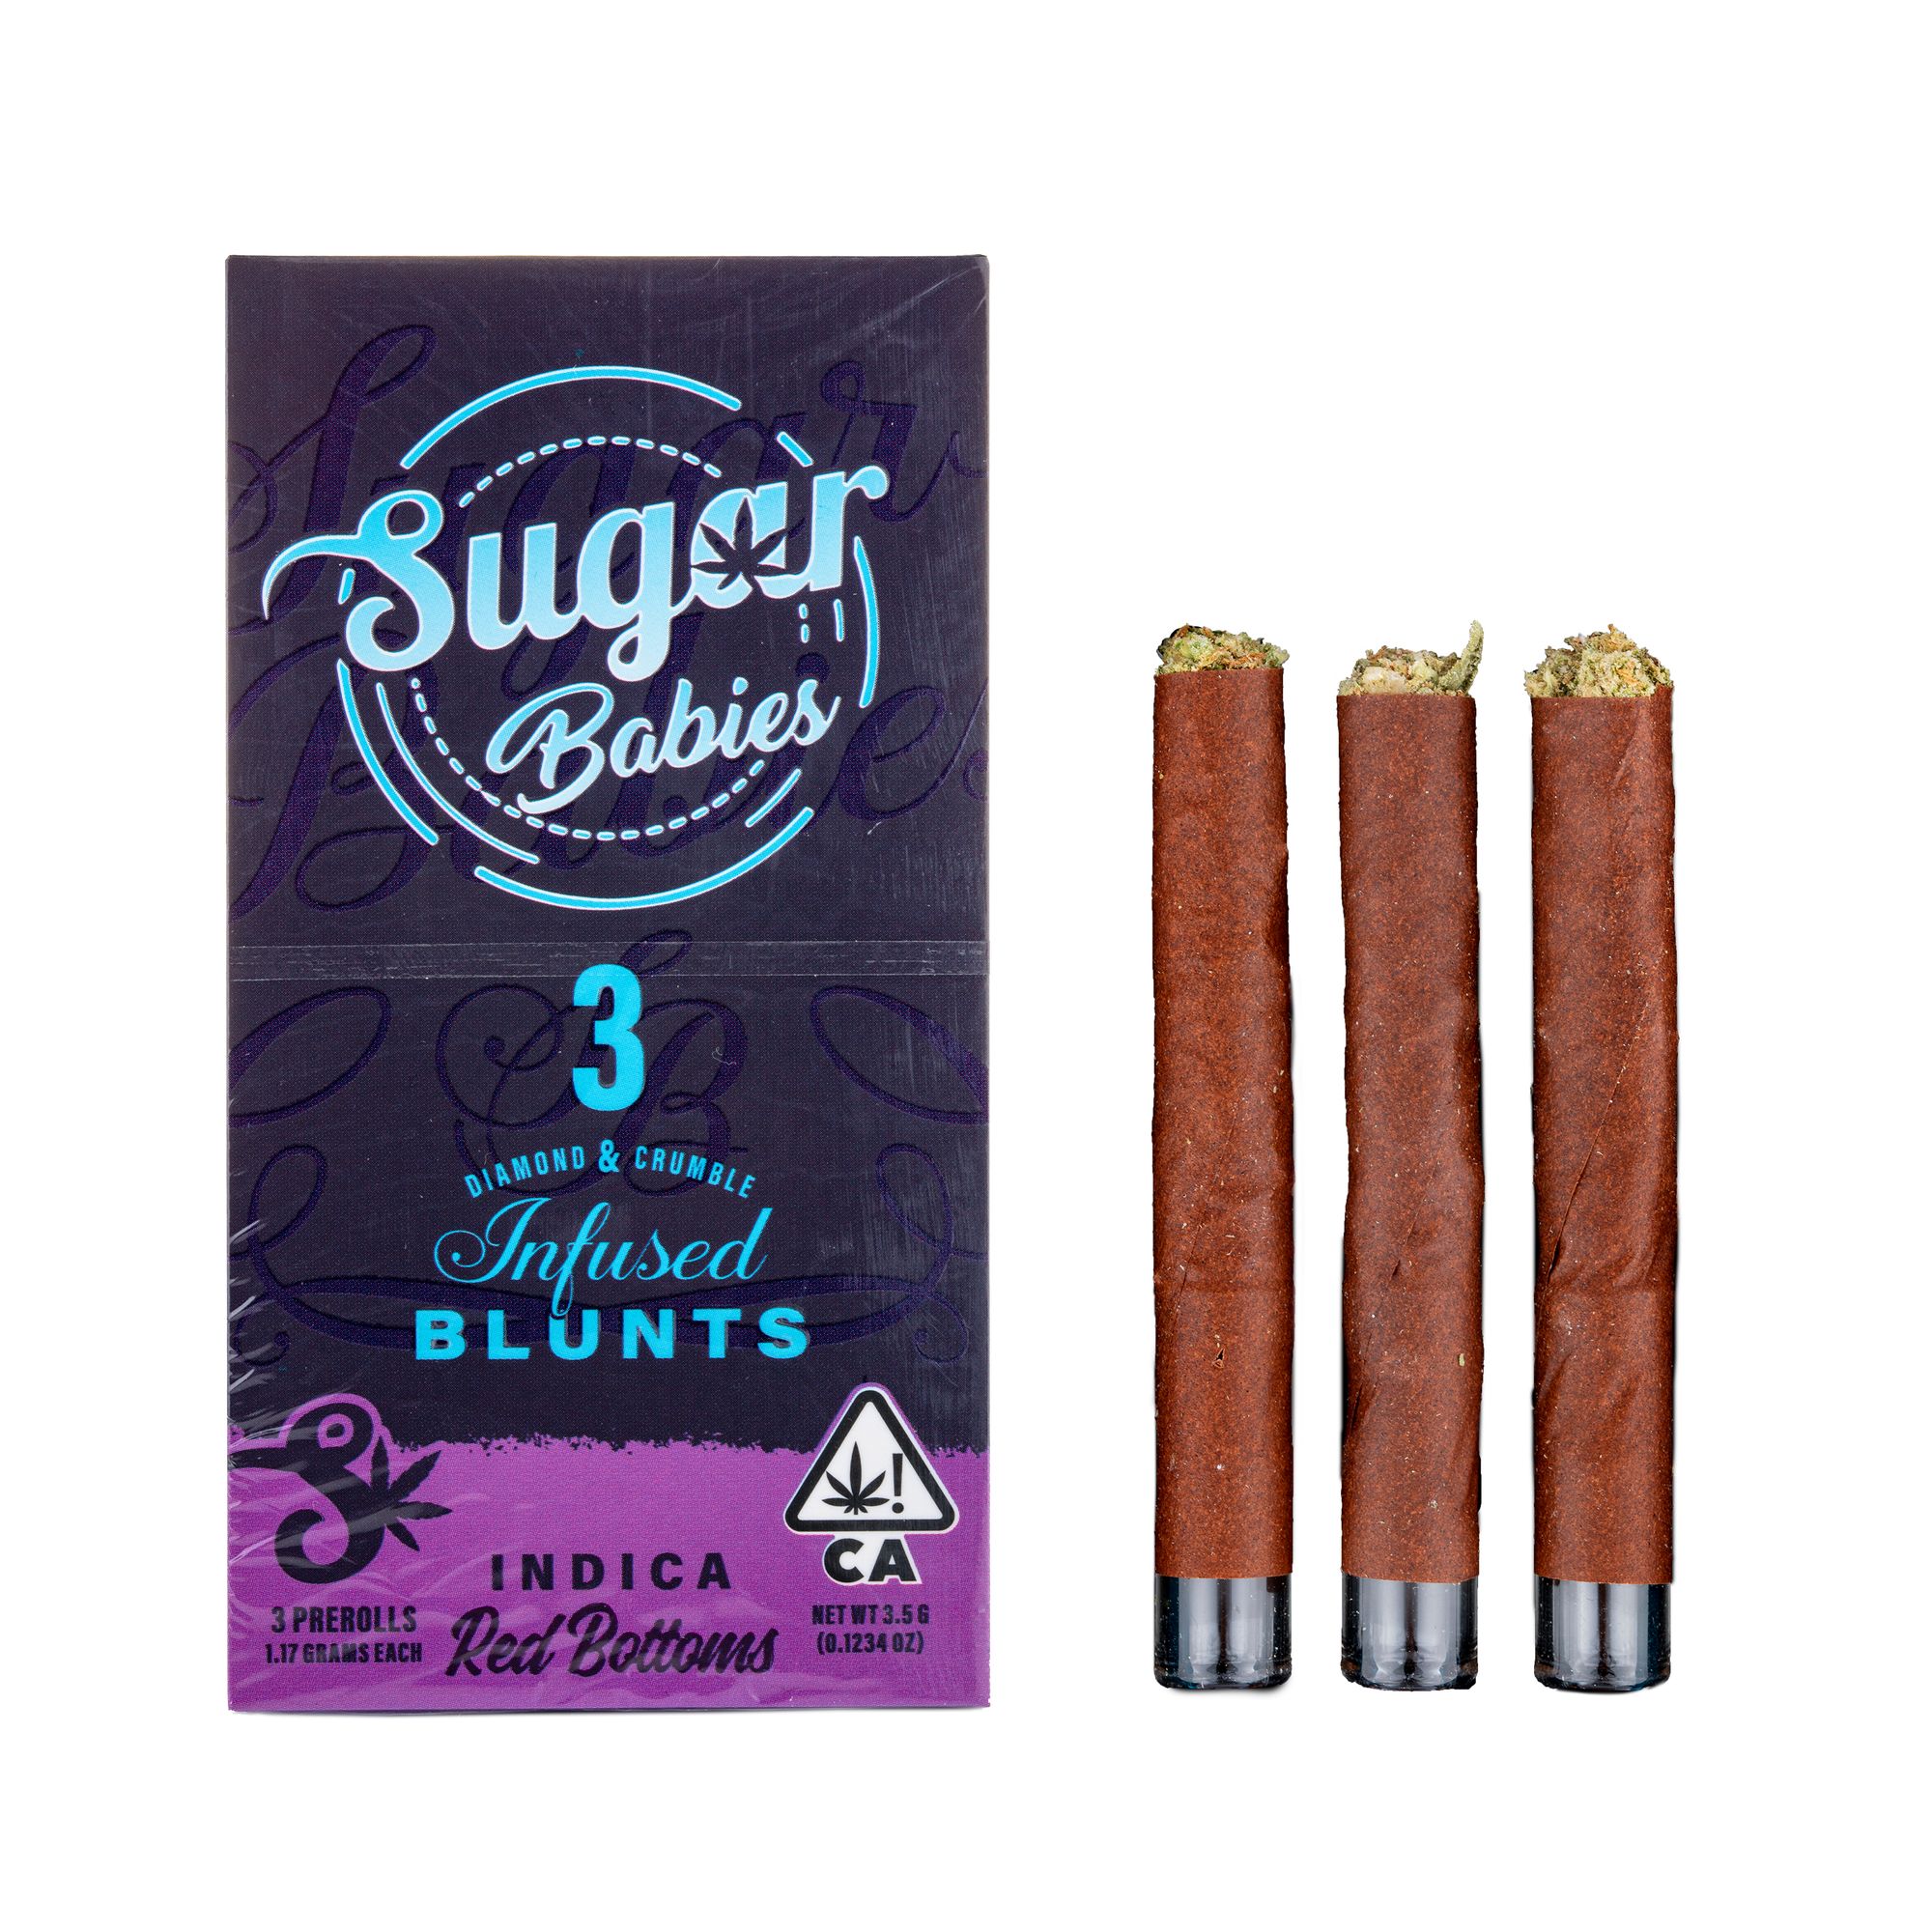 Sugar Babies 3pk Diamond and Crumble Infused Blunts - Red Bottoms